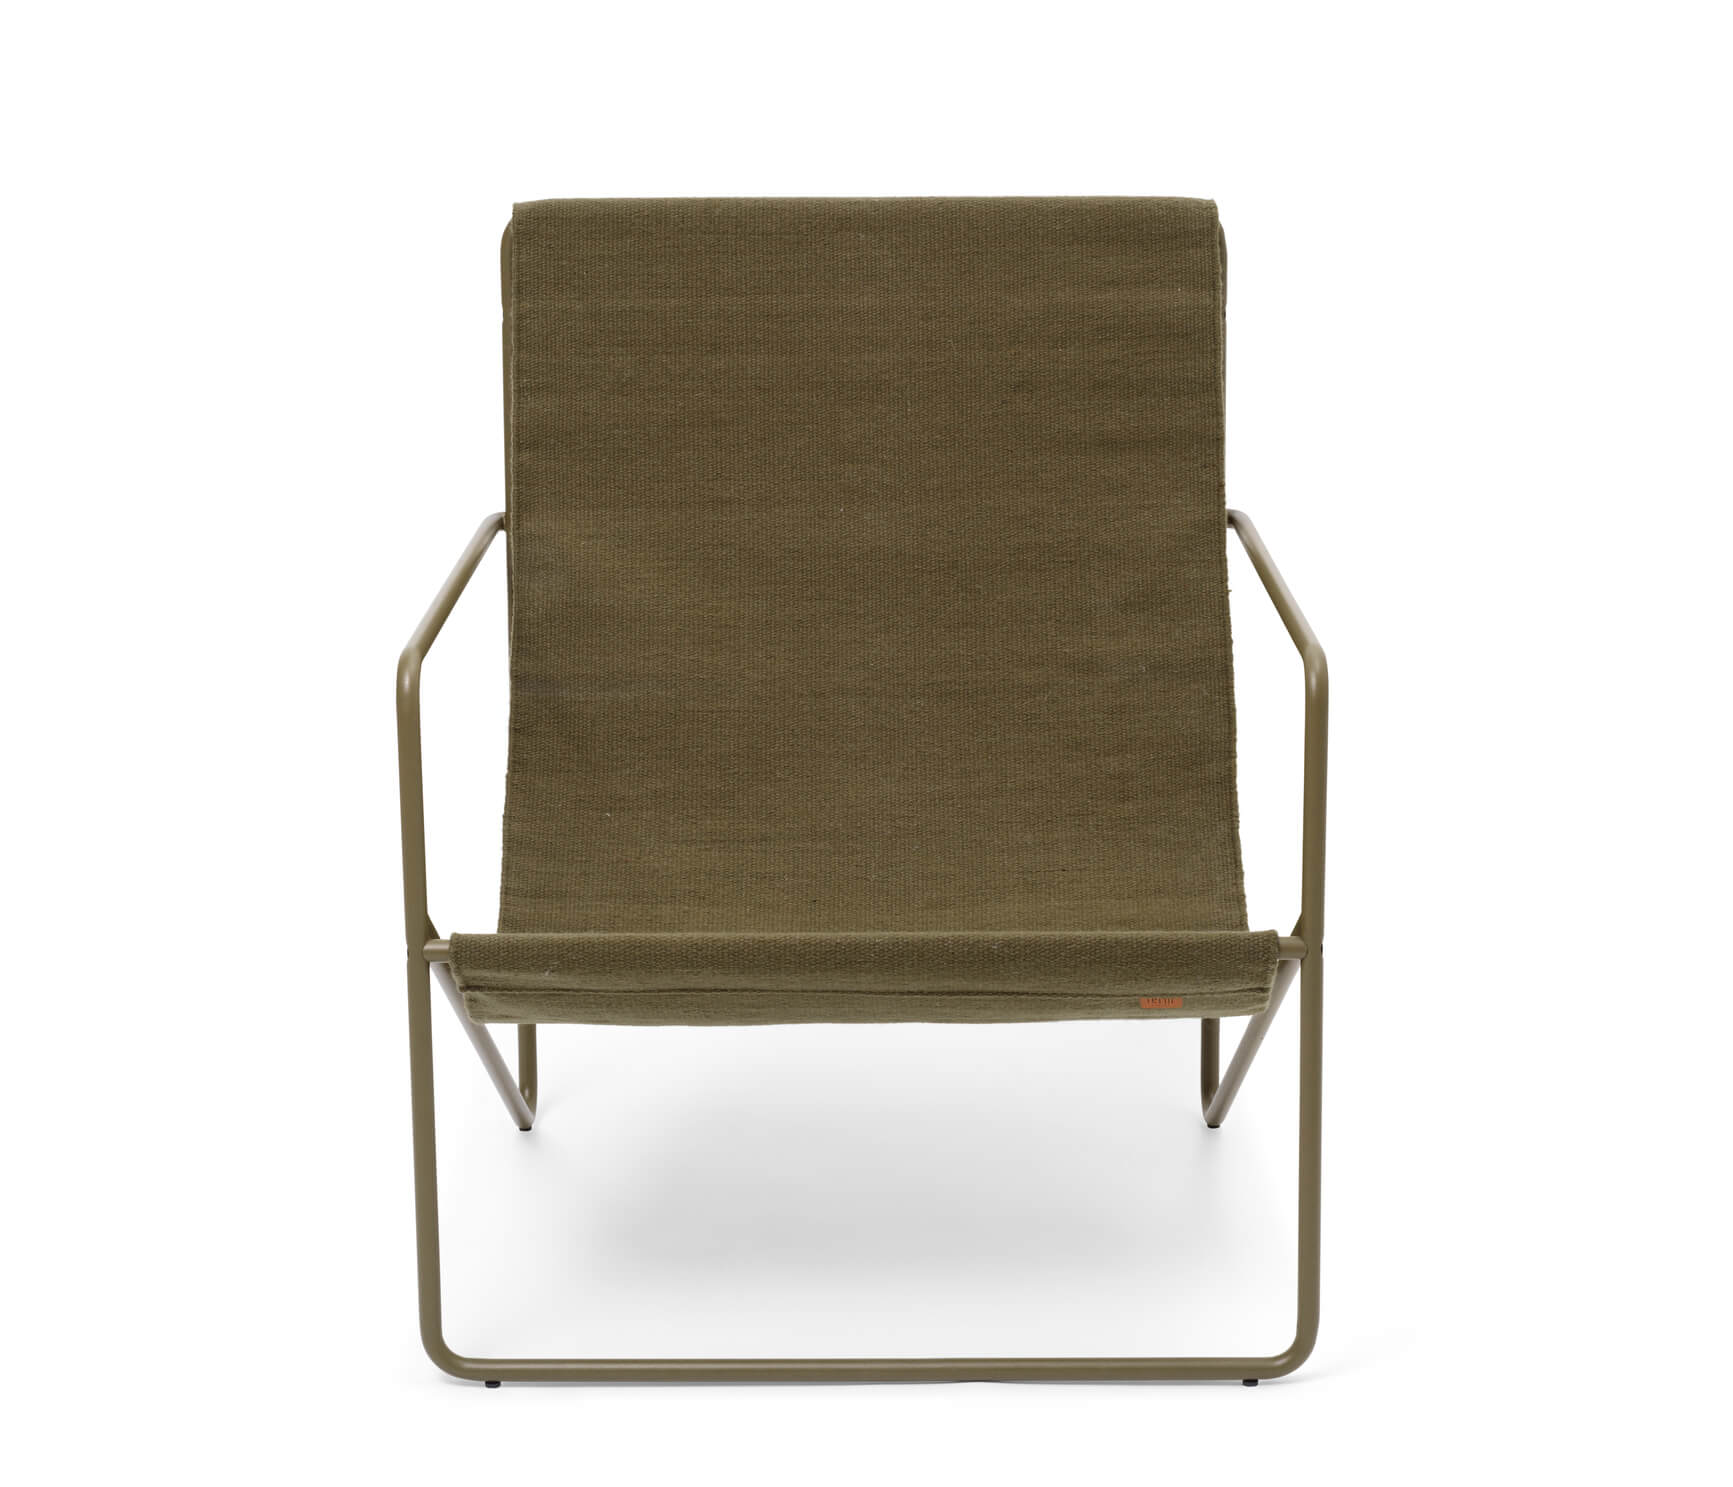 Desert Lounge Chair | Olive Frame + Olive Fabric | by ferm Living - Lifestory - ferm Living